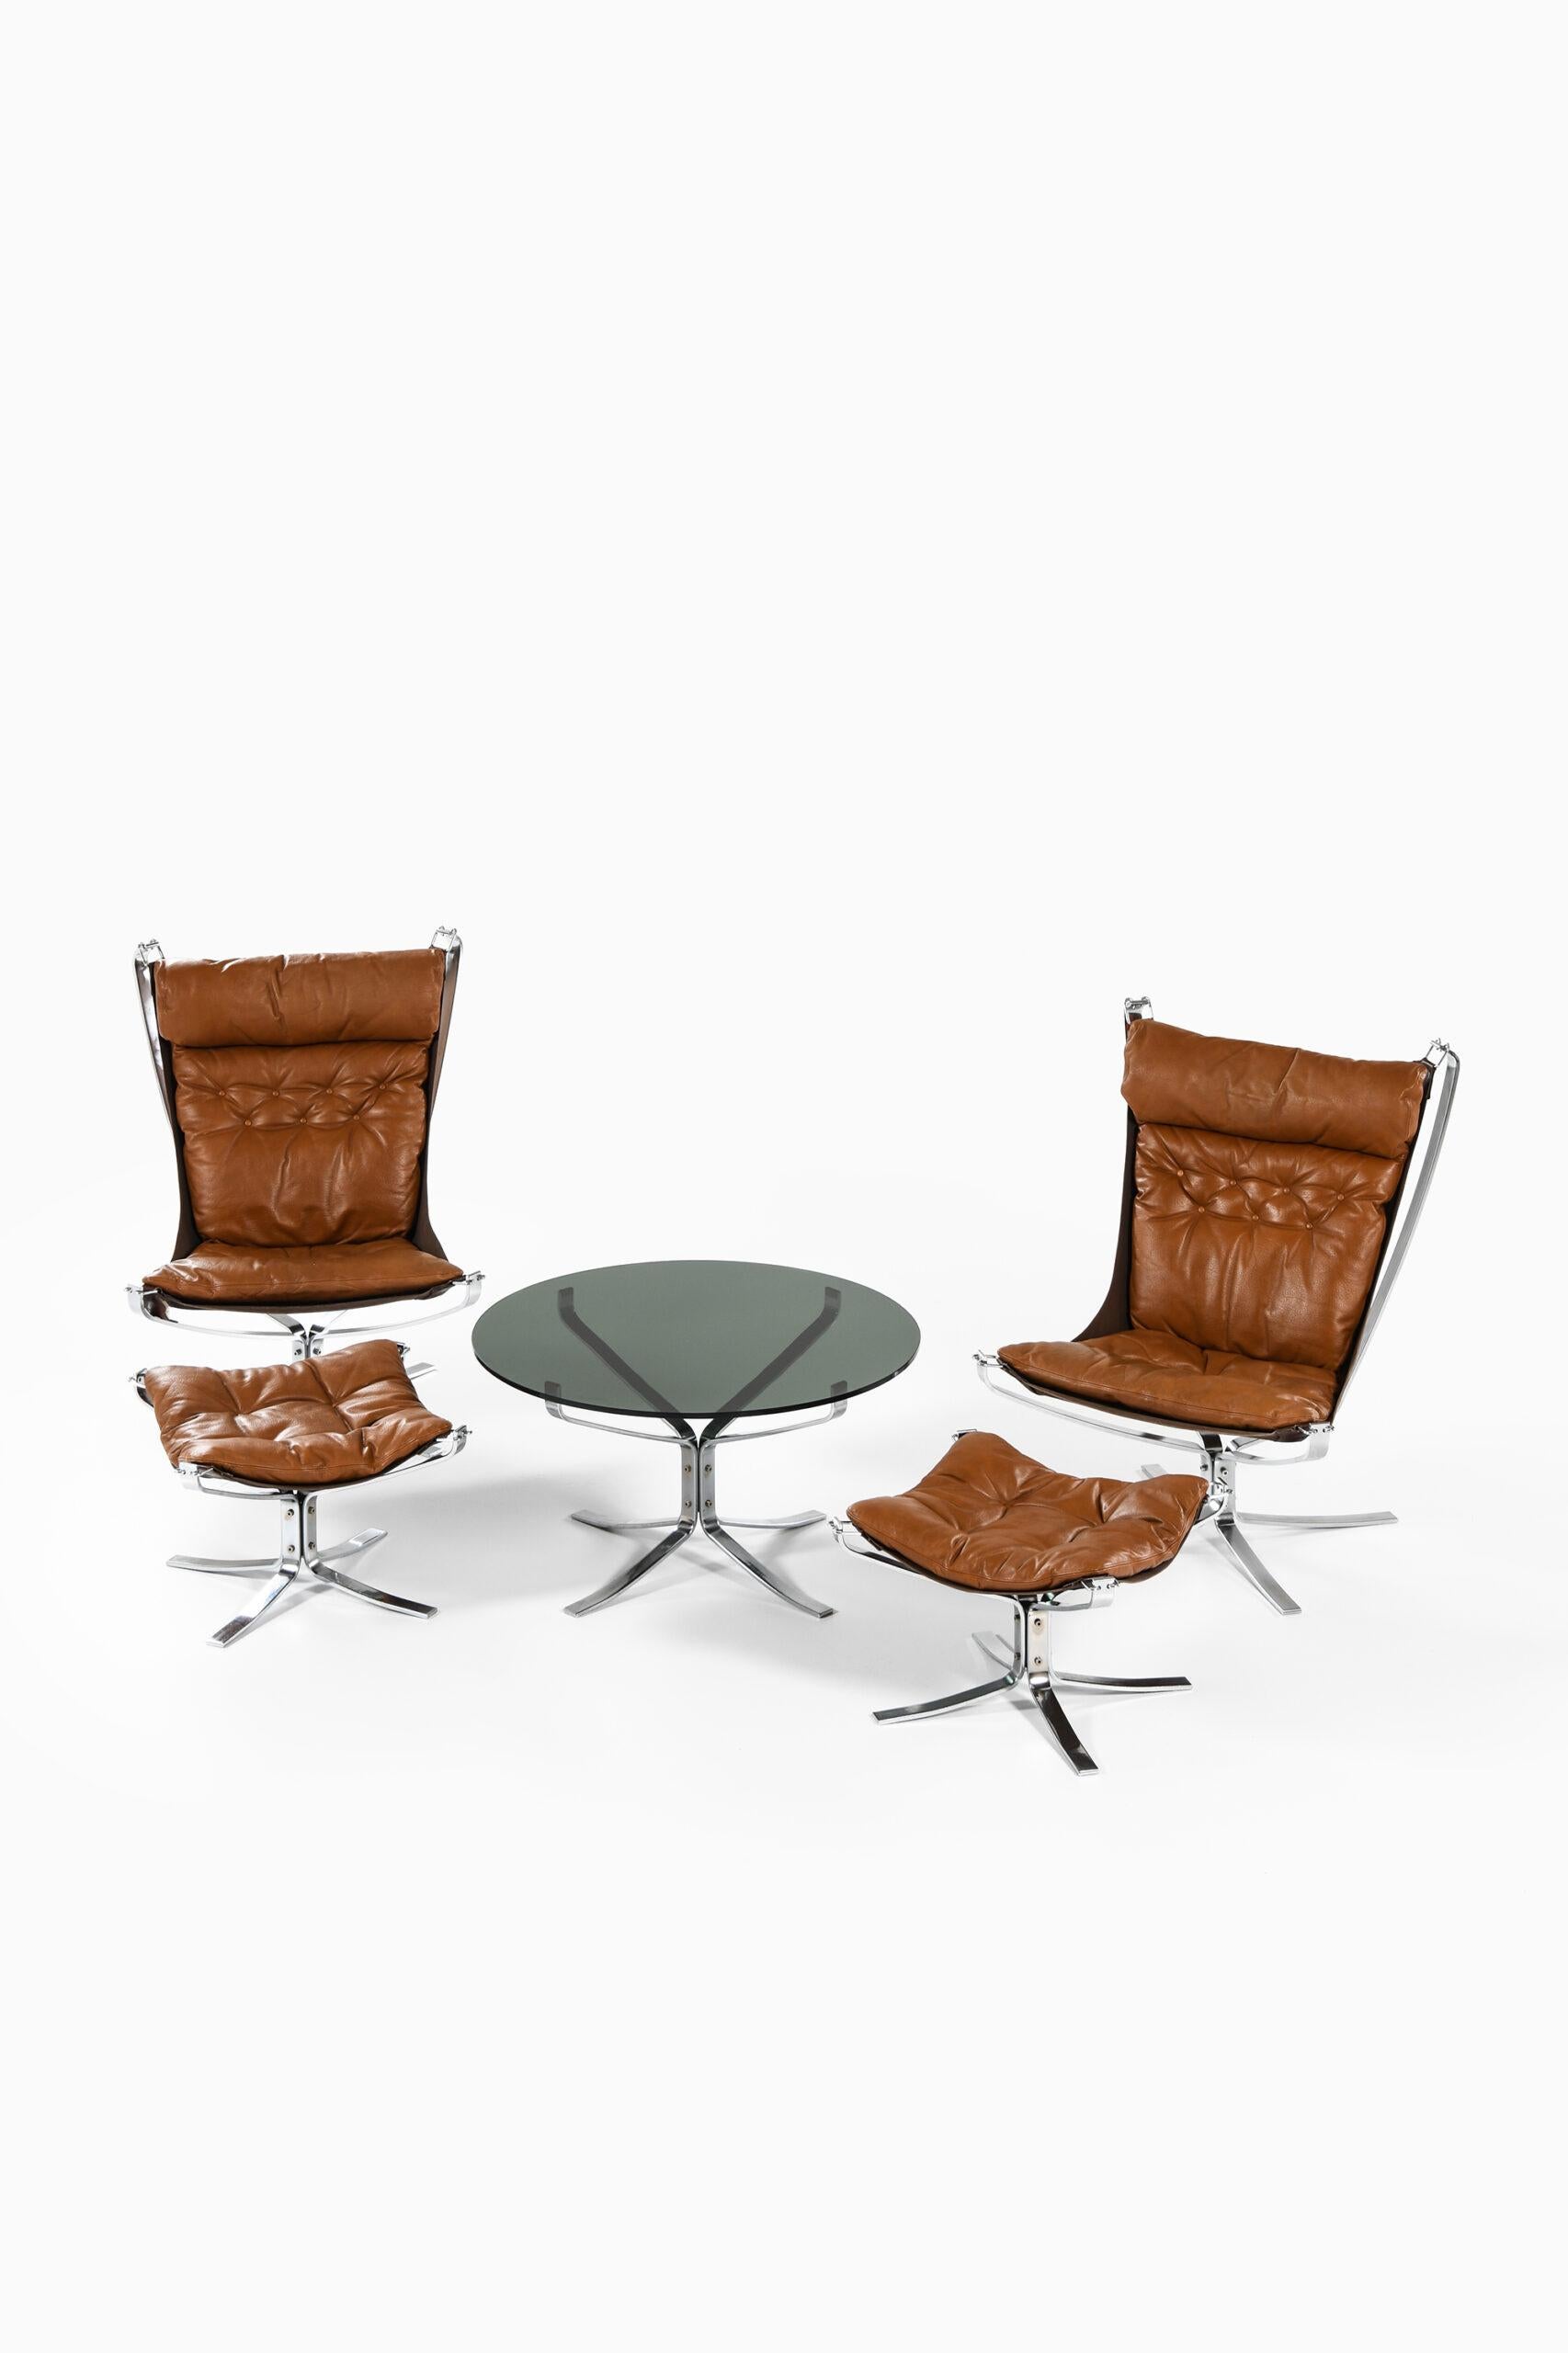 Rare seating group consisting of 2 easy chairs with stools and coffee table model Falcon designed by Sigurd Resell. Produced by Vatne Møbler in Norway.
Dimensions table (W x D x H): 90 x 90 x 48 cm.
Dimensions chairs (W x D x H): 77 x 80 x 101 cm,